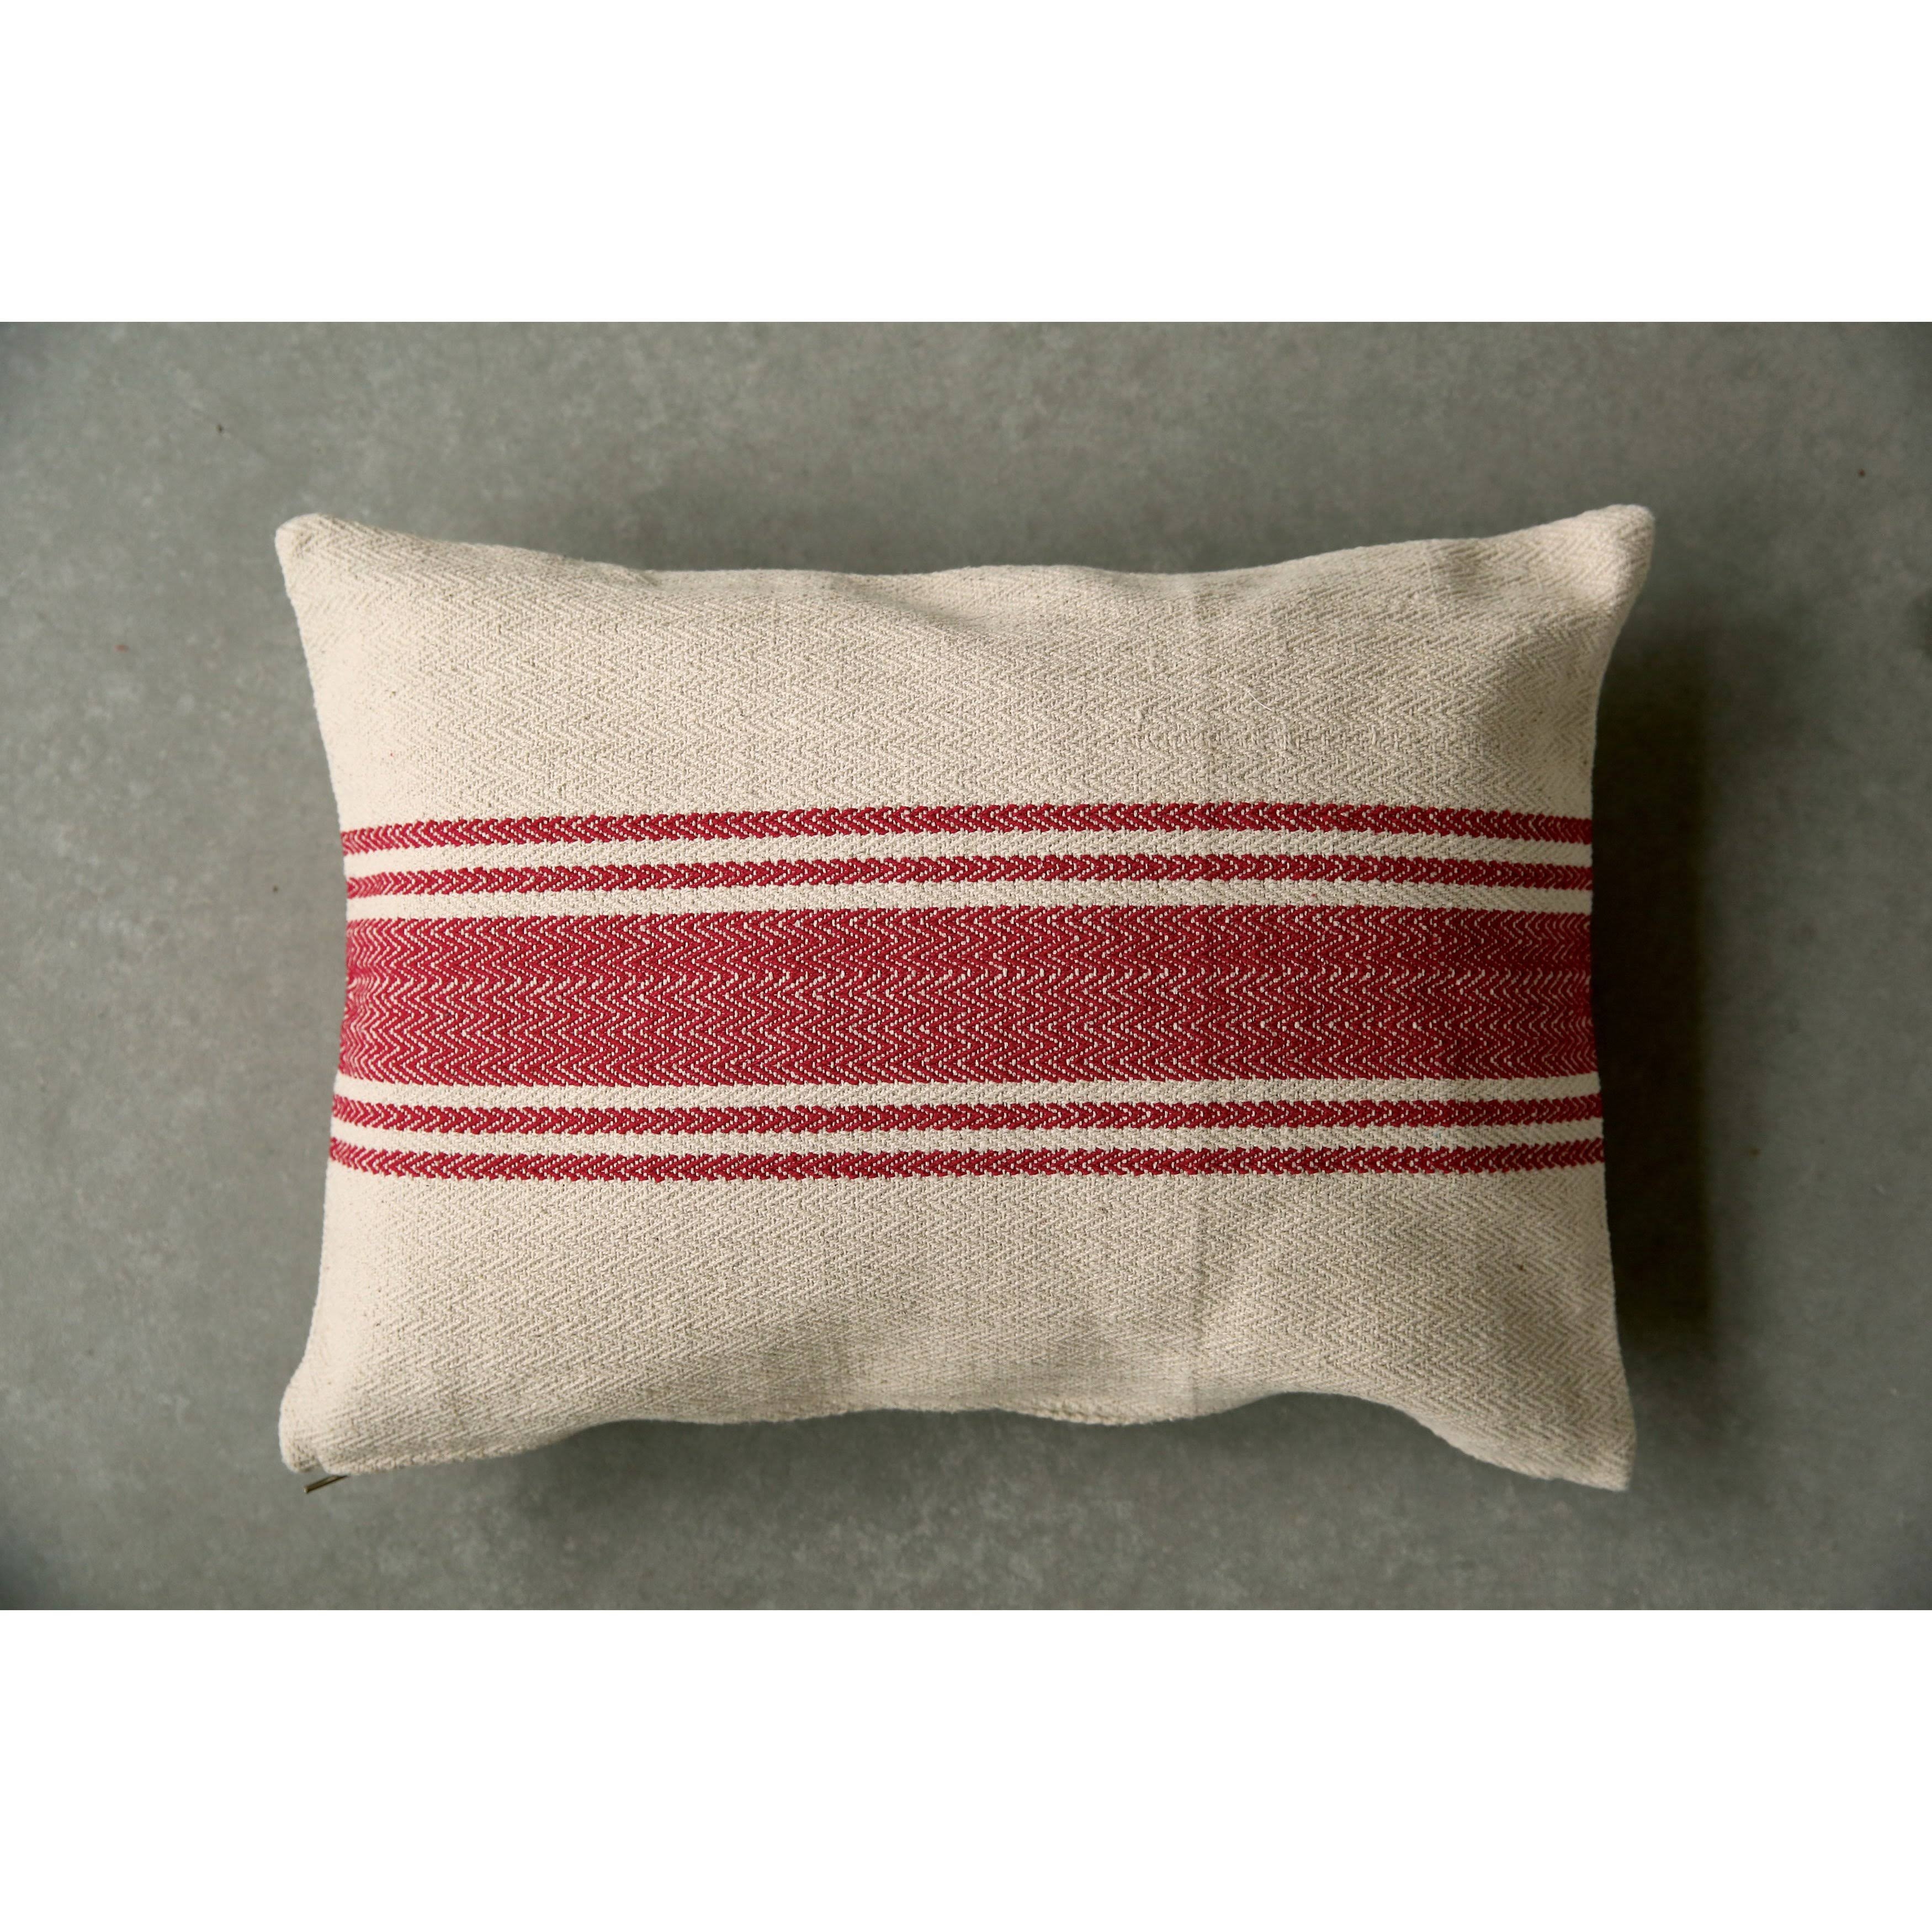 Cream Cotton Canvas Pillow with Red Stripes - Image 1